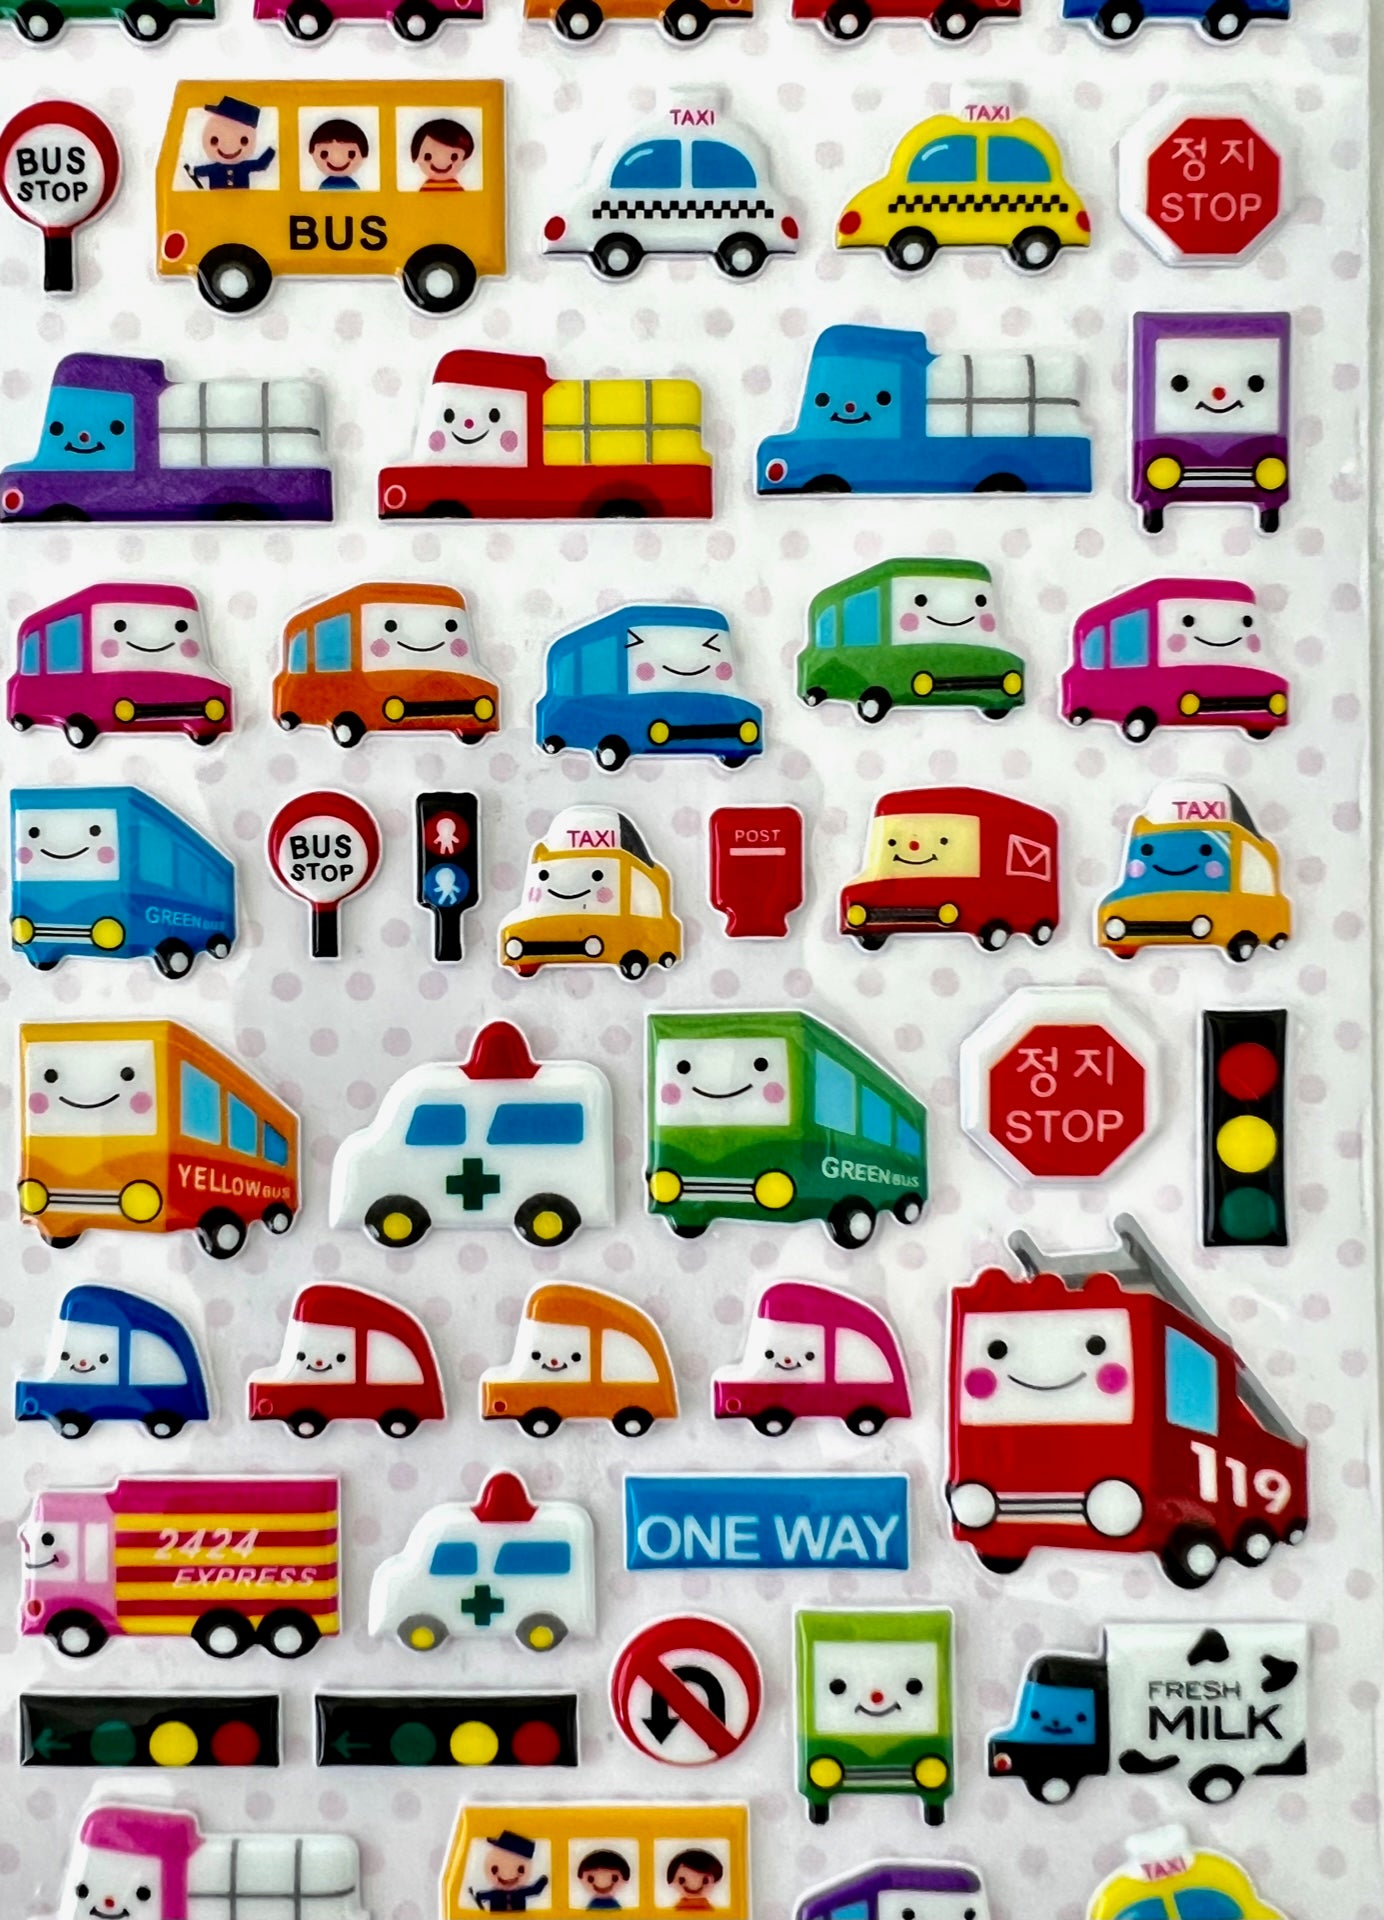 Cars and Trucks Stickers